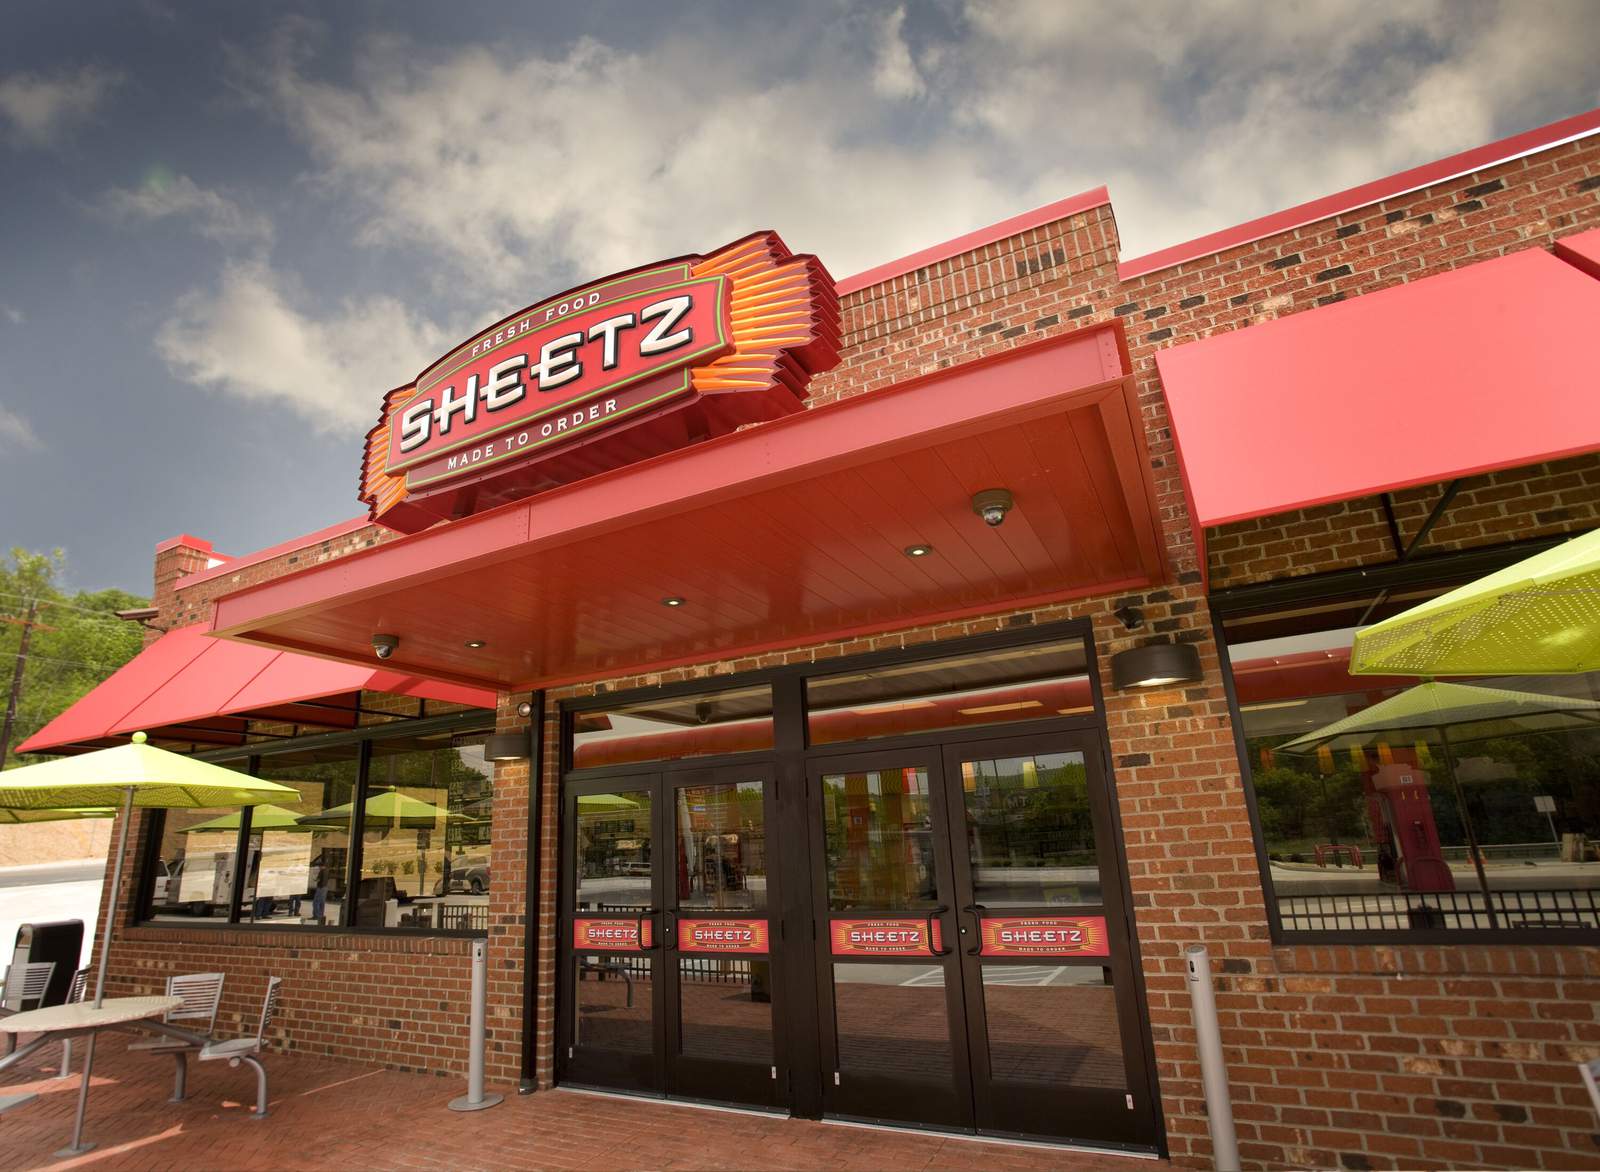 Sheetz plans to hire 3,000 new employees companywide